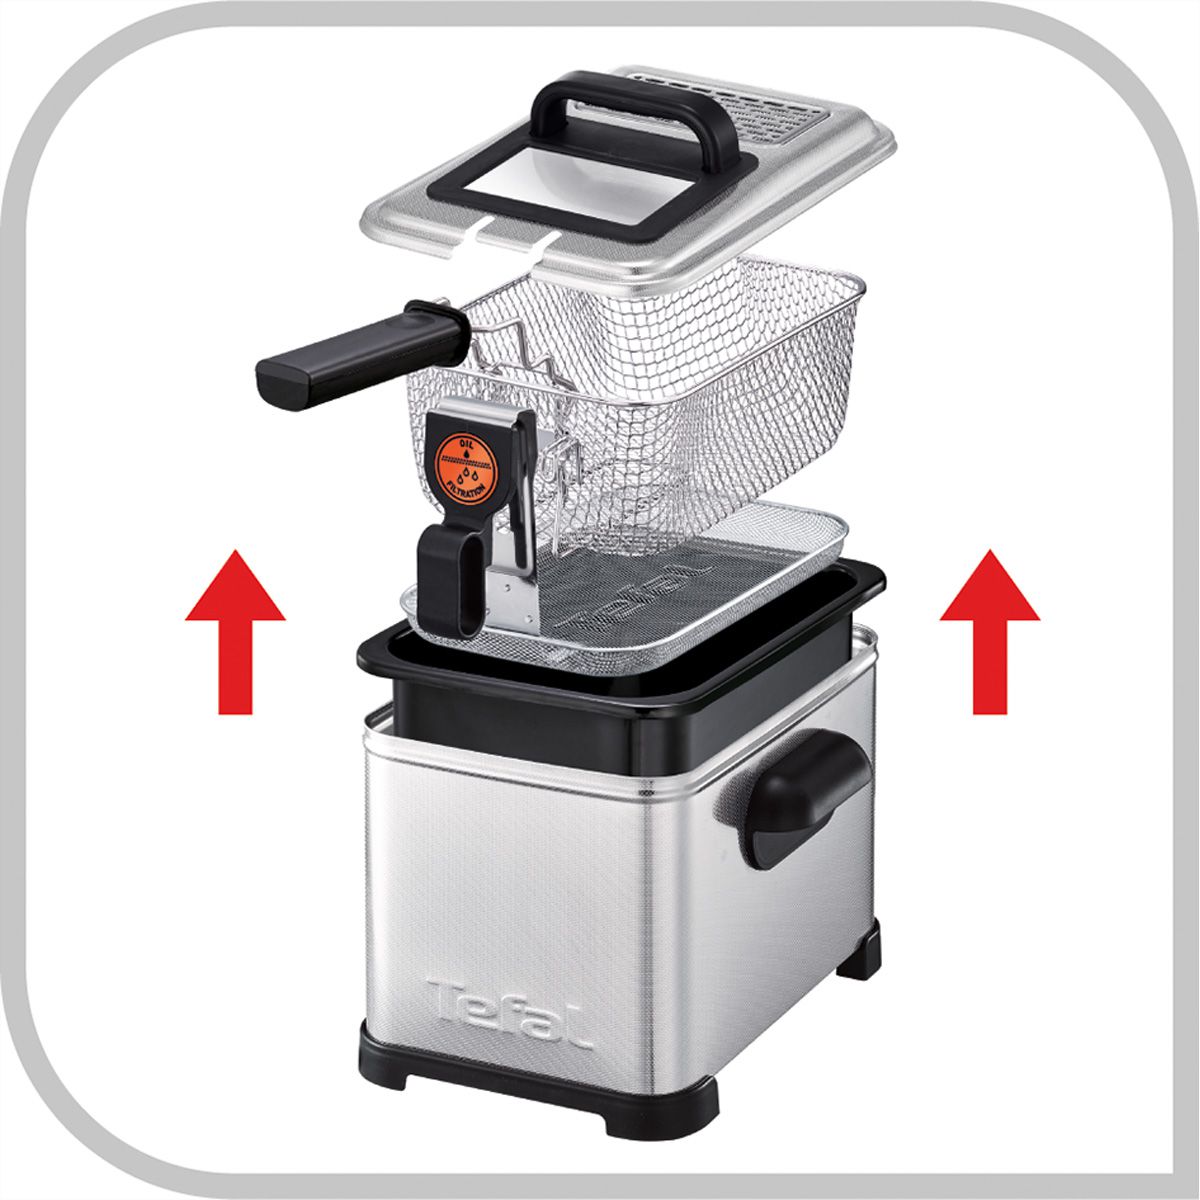 Tefal Fritteuse Filtra Pro Inox & Design - COOL AG | Fritteusen